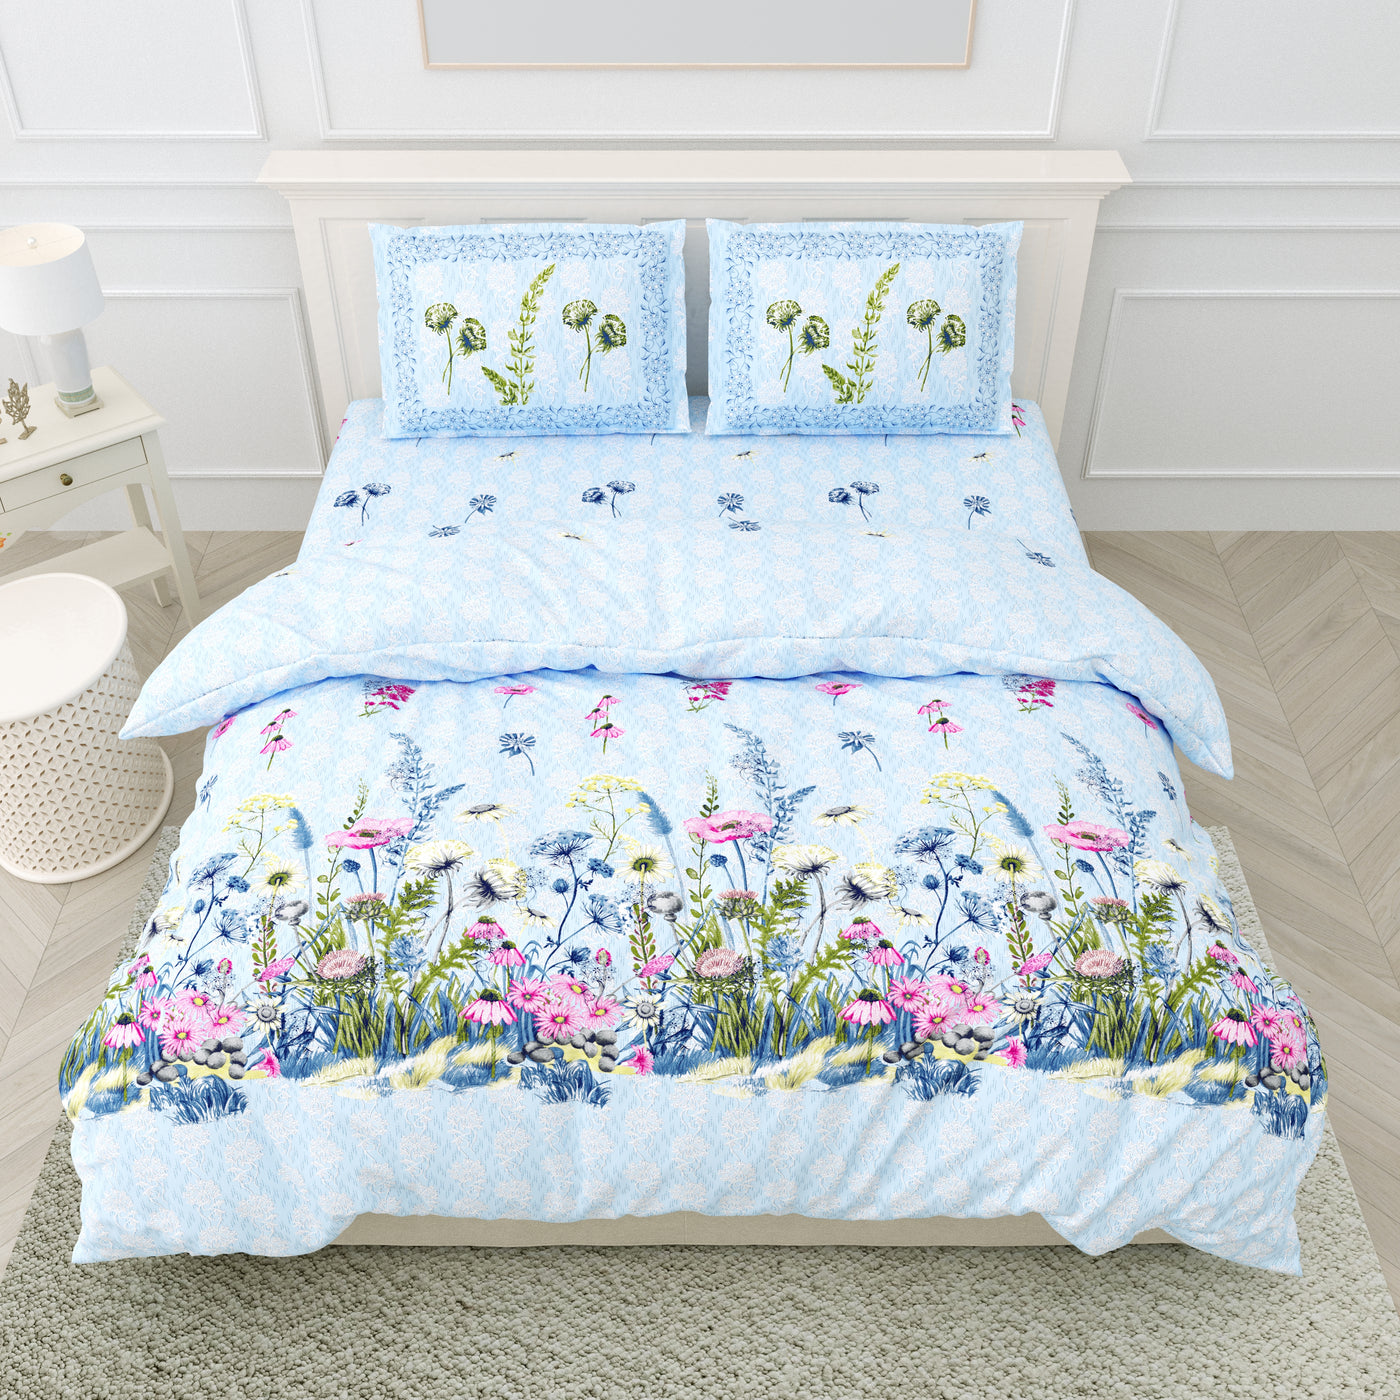 Bedsheet for double bed